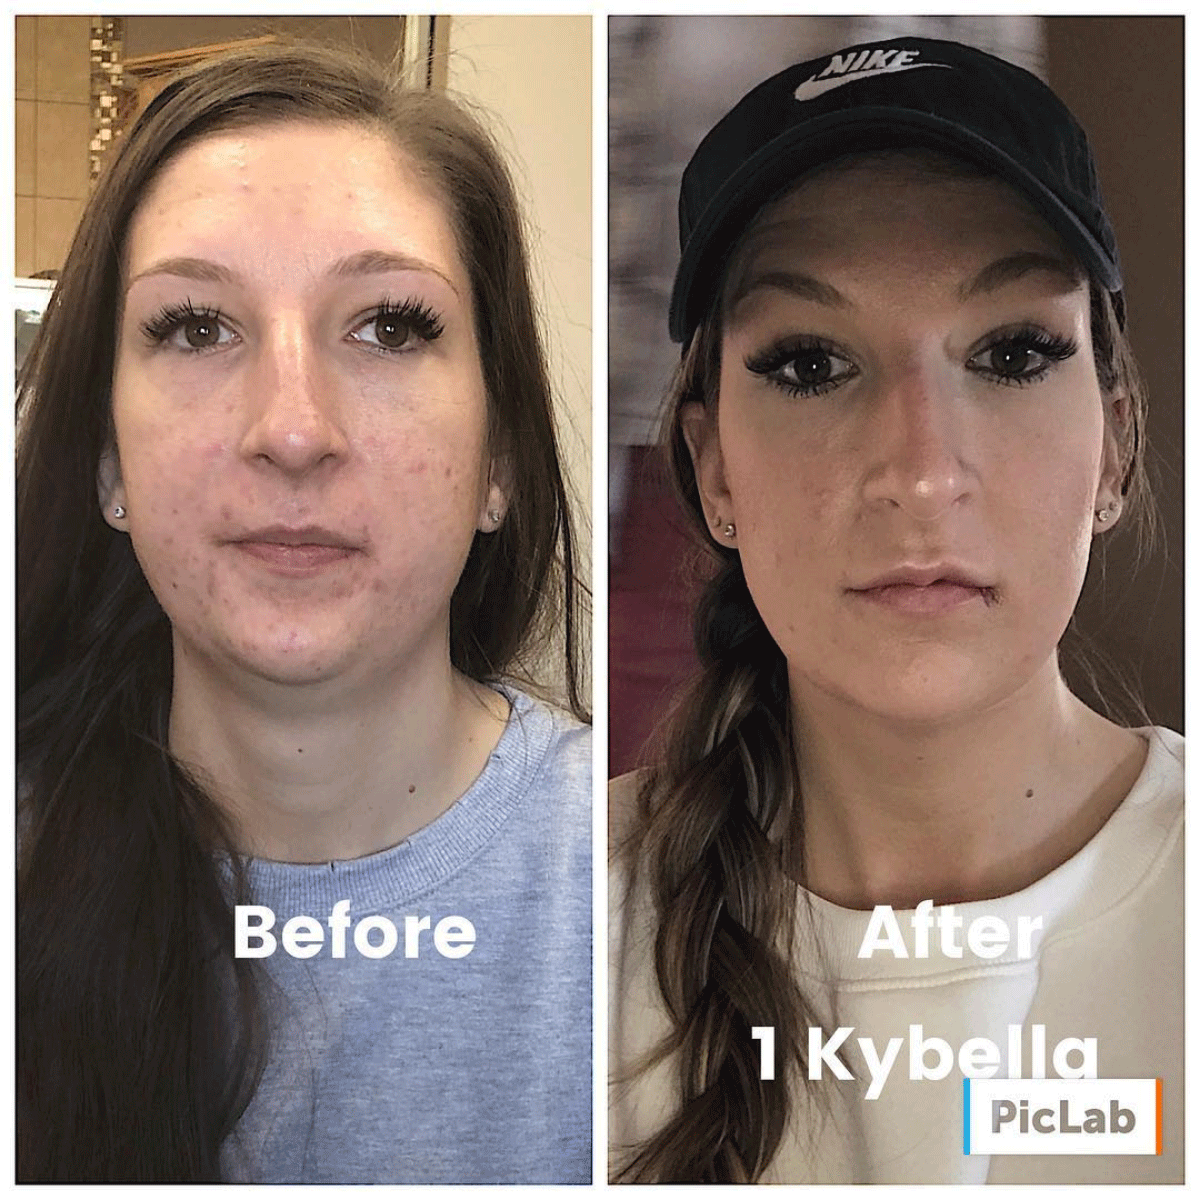 Kybella double shin treatment before and after